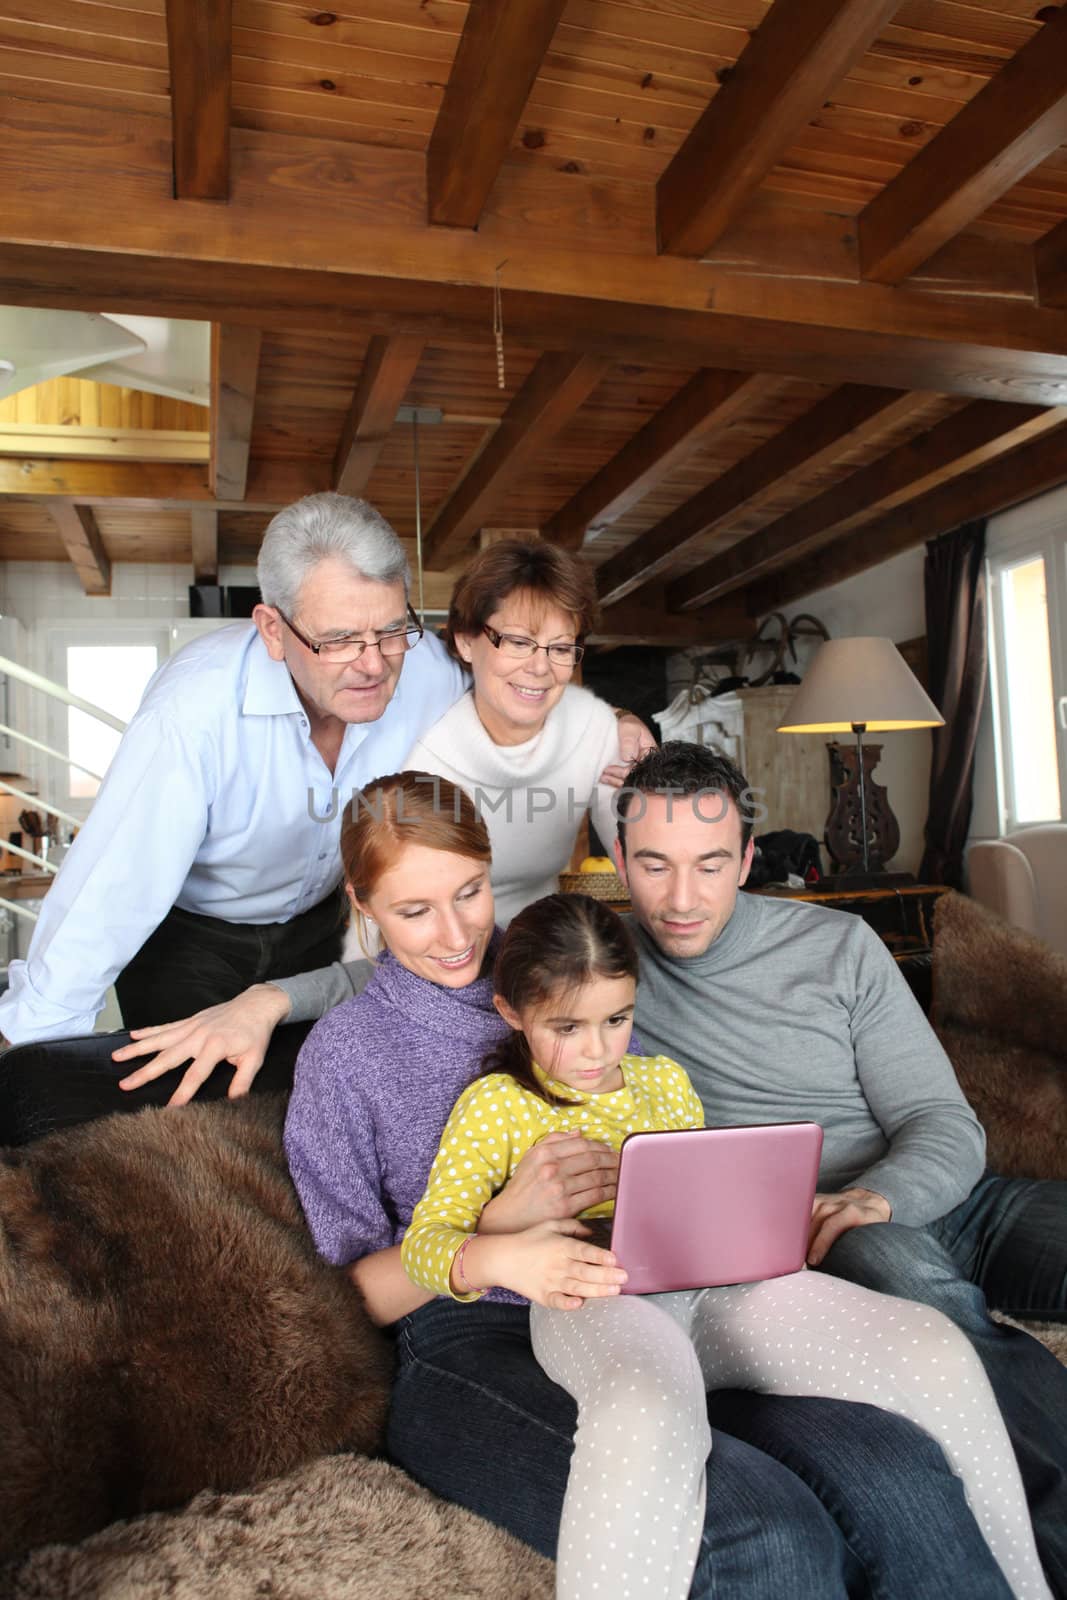 Family in front of a computer by phovoir